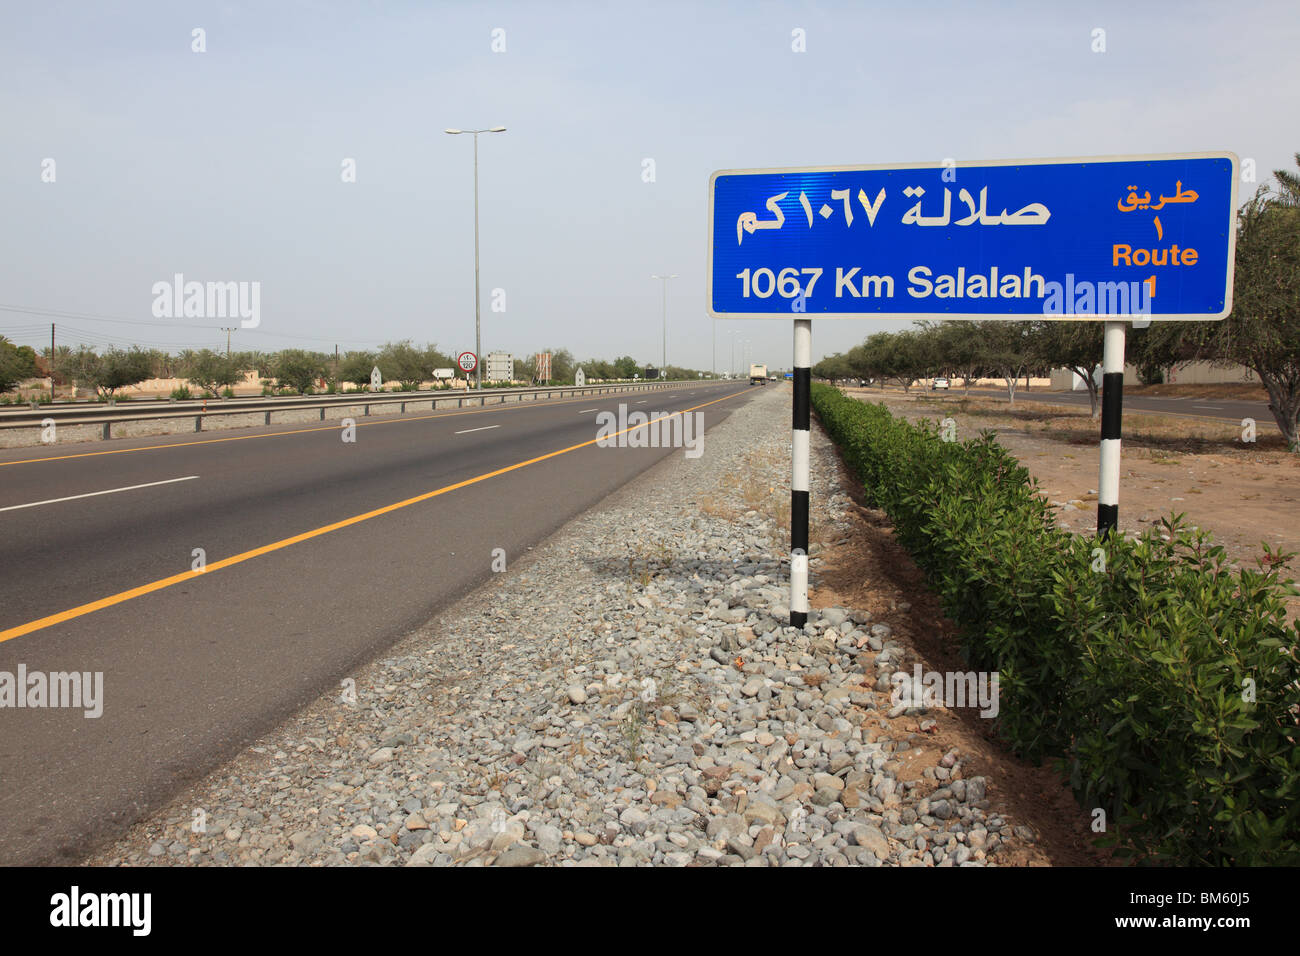 bilingual street direction sign, highway route No1 near Muscat showing 1067 km distance to Salalah, Oman.Photo by Willy Matheisl Stock Photo